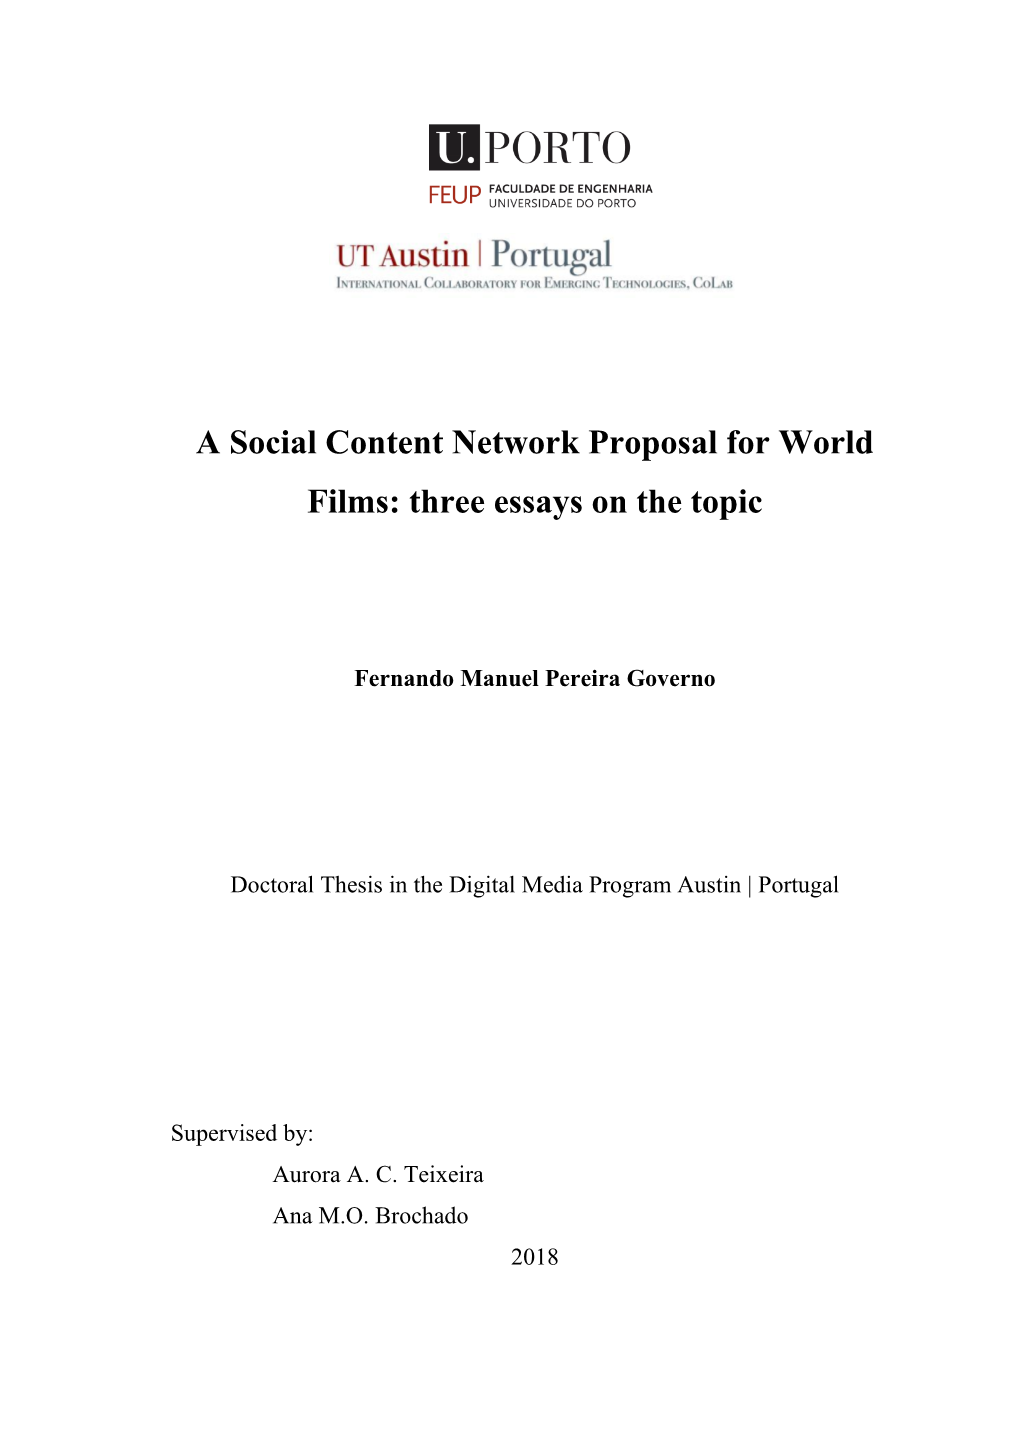 A Social Content Network Proposal for World Films: Three Essays on the Topic